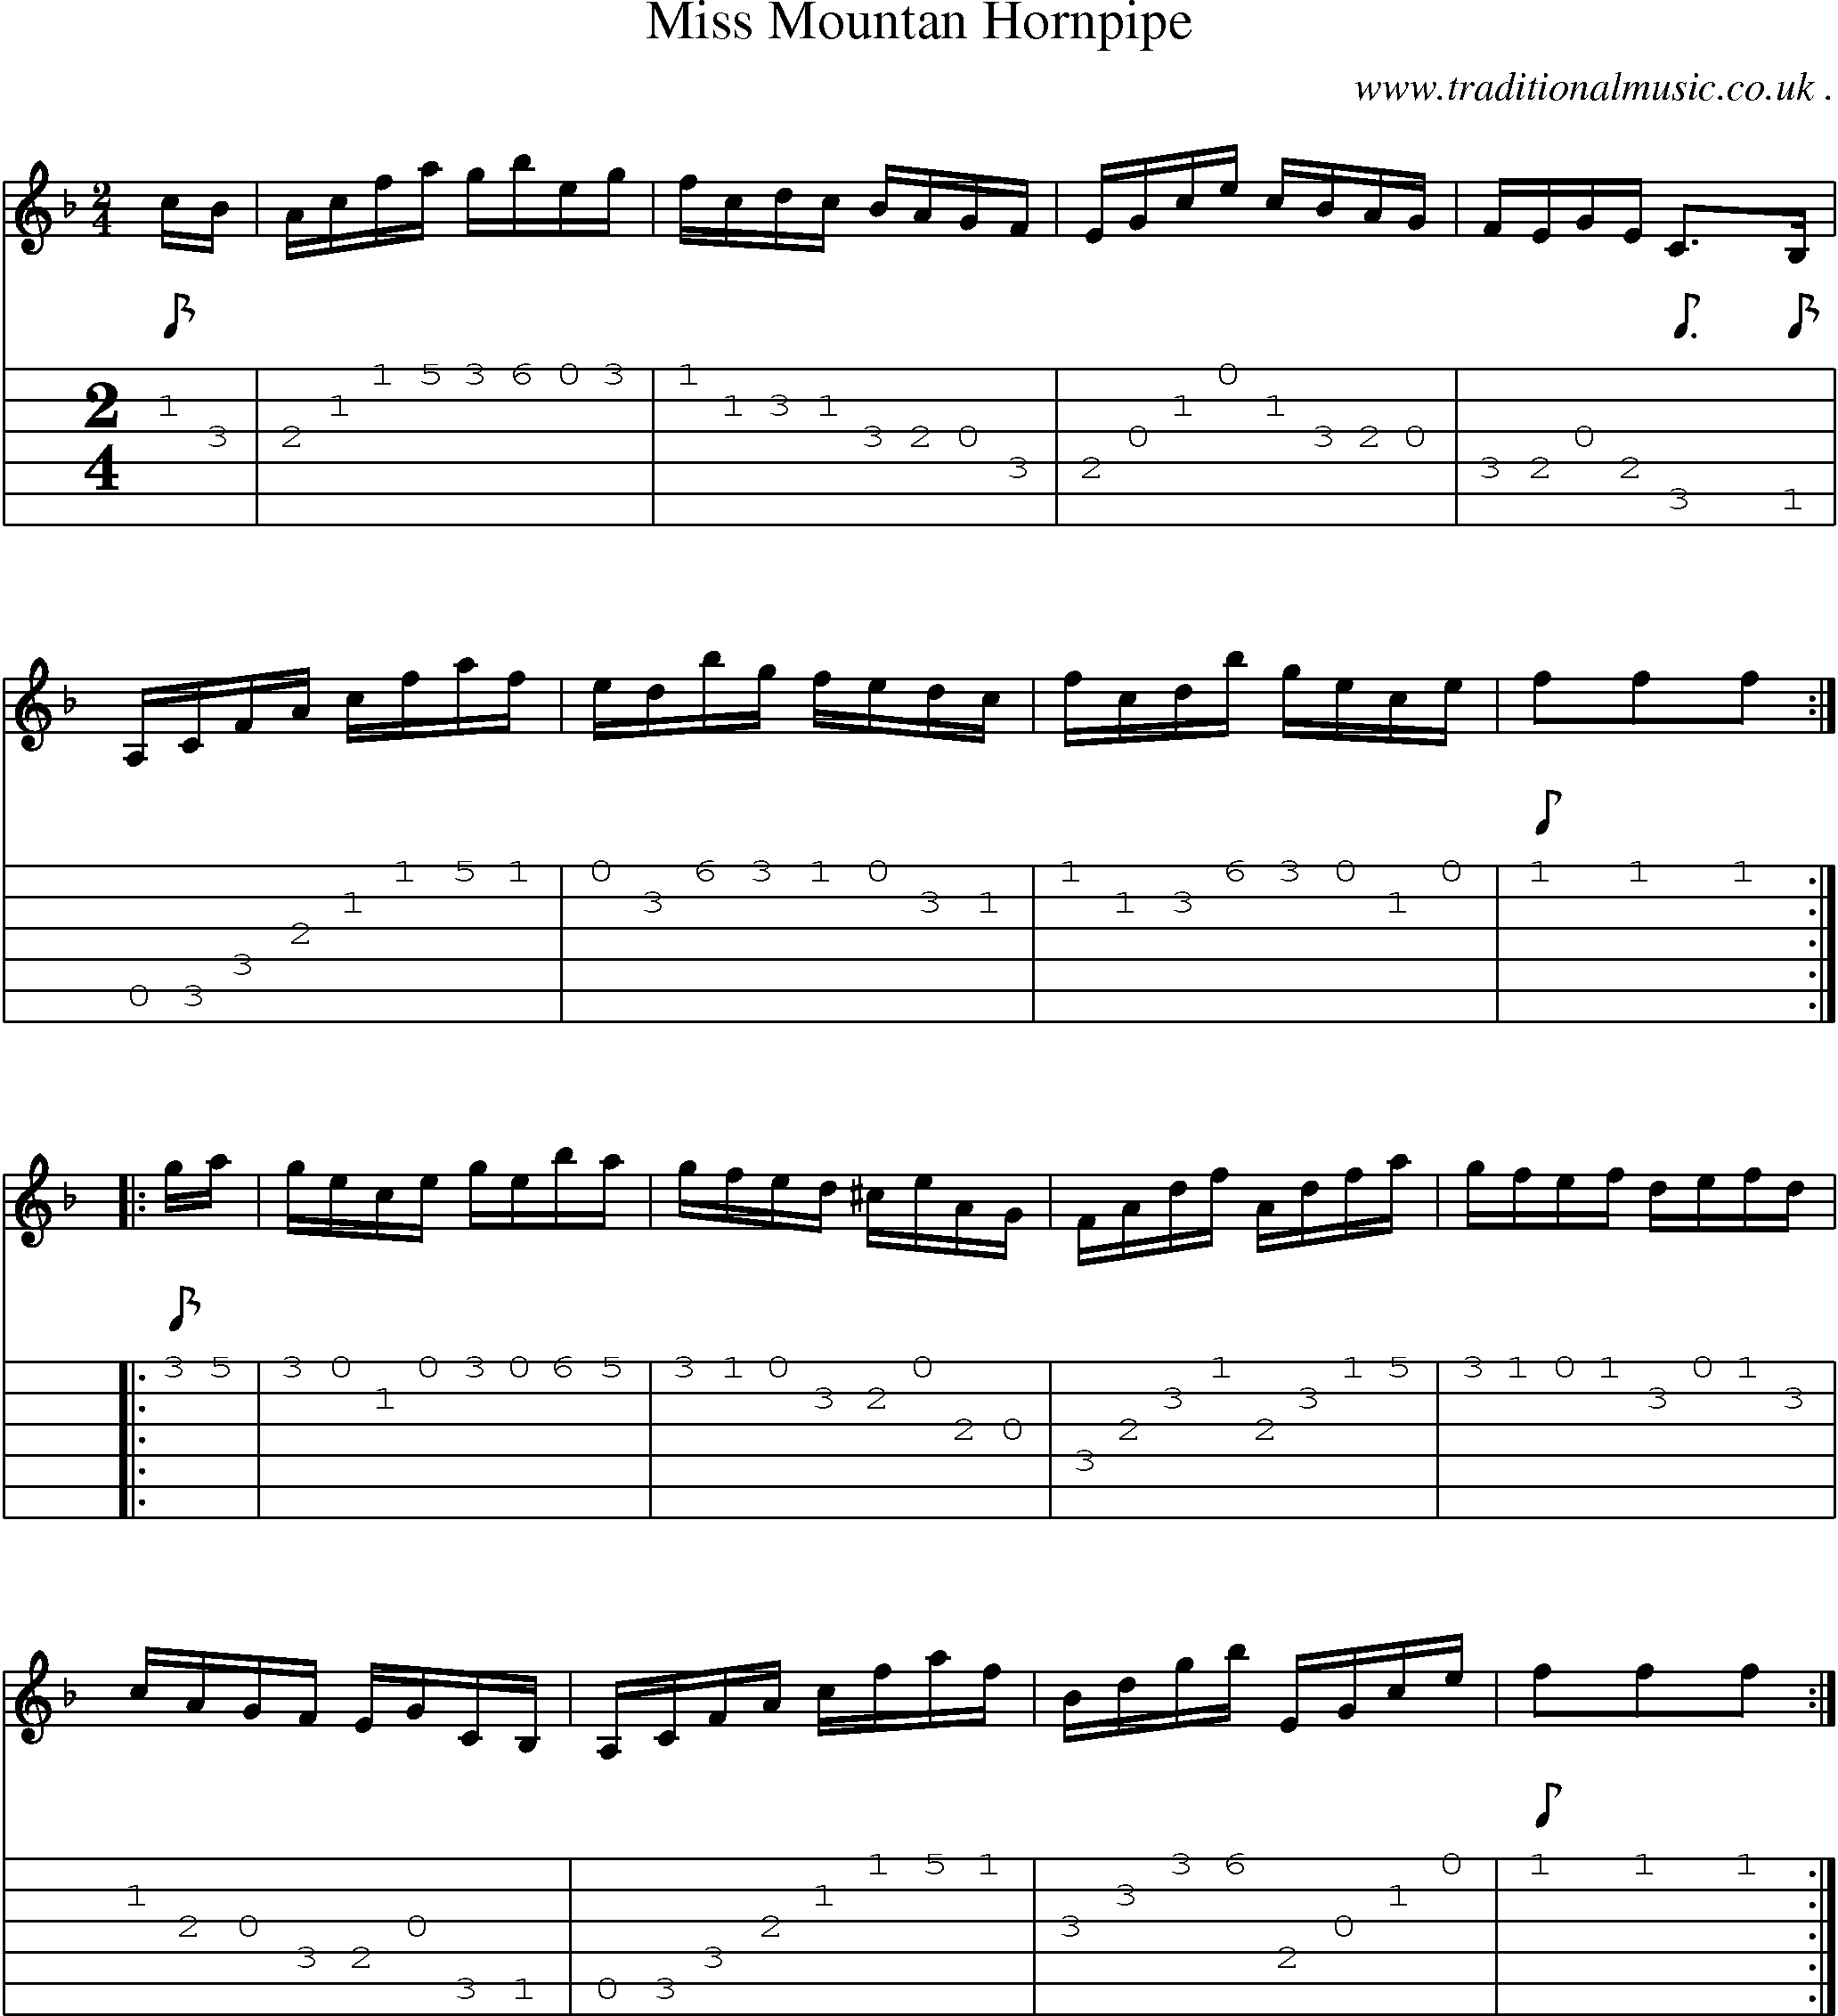 Sheet-Music and Guitar Tabs for Miss Mountan Hornpipe